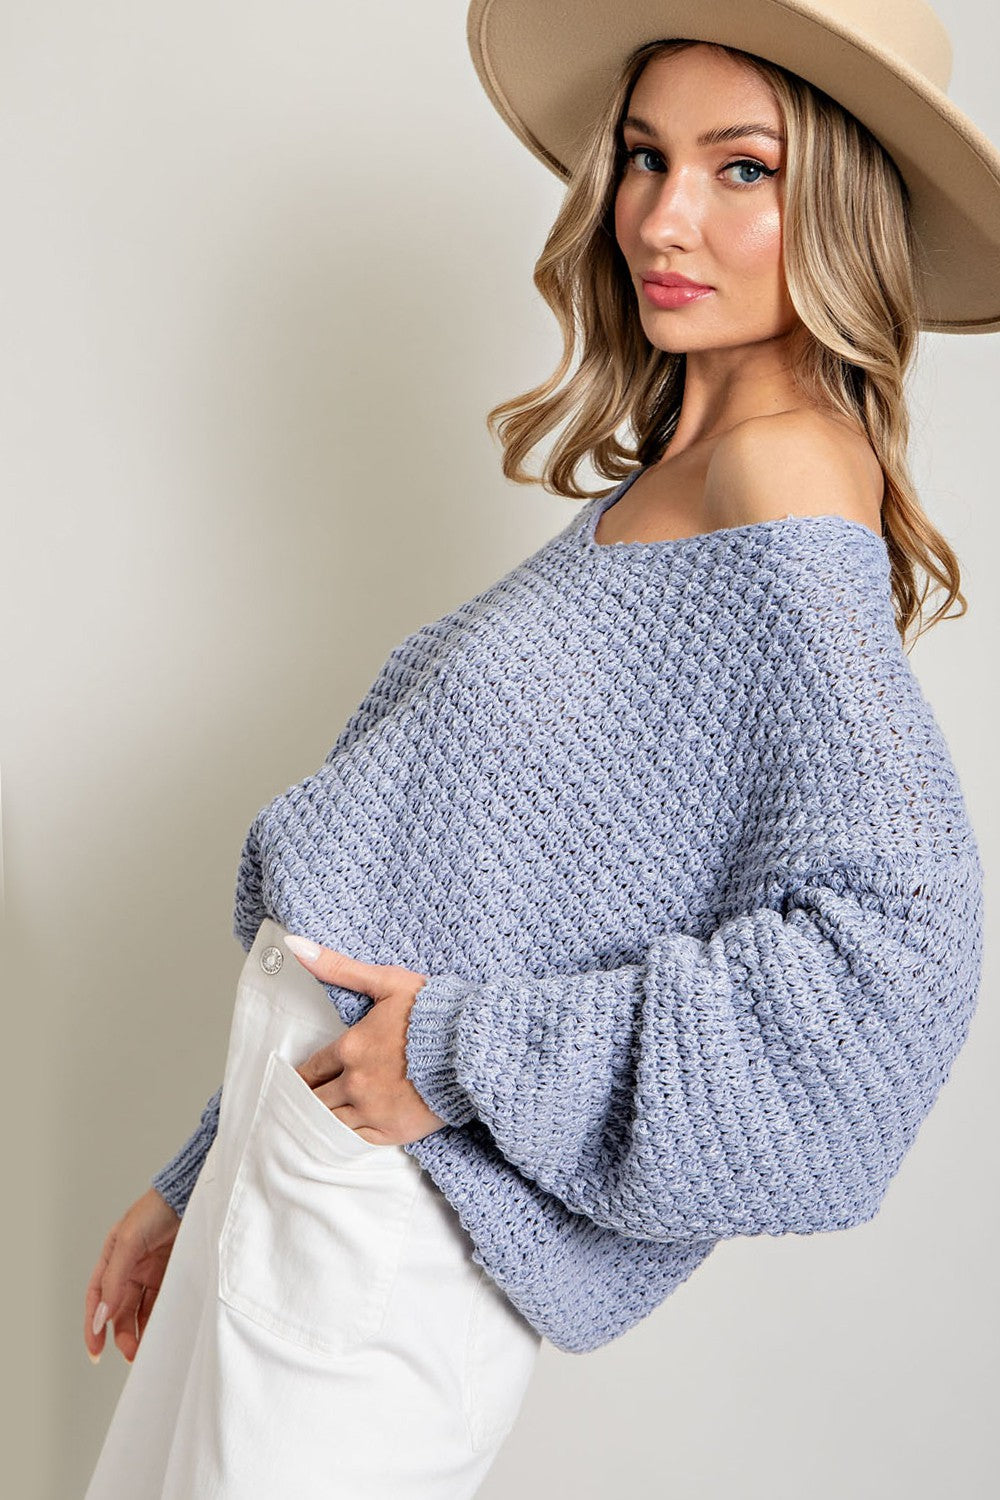 Periwinkle Spring Knit Sweater